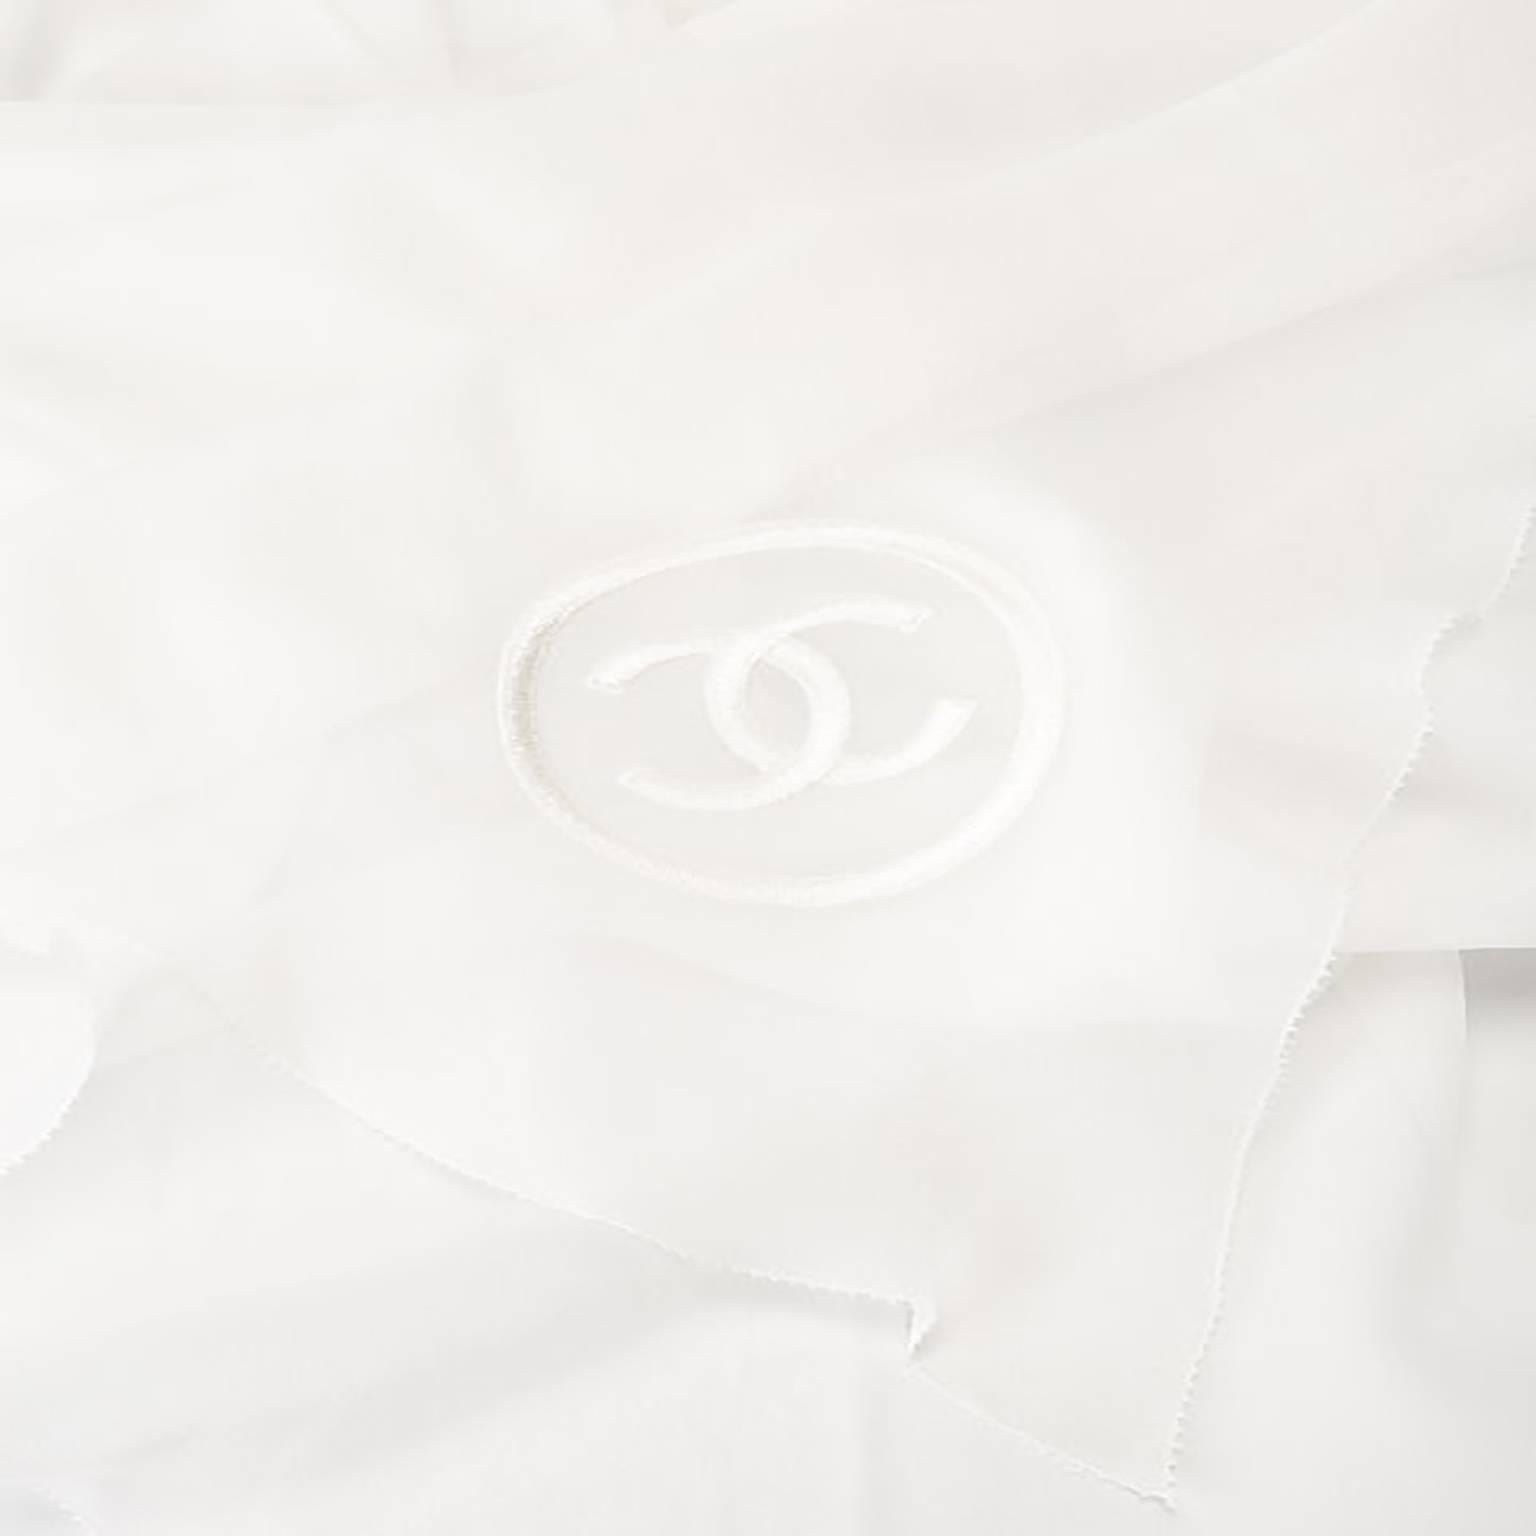 Utterly feminine, this Chanel scarf is rendered in a floaty, ivory silk. Its pleated silhouette tapers at the middle for a flattering effect when wrapped around the neck. The scarf features an embroidered Chanel monogram in tonal ivory